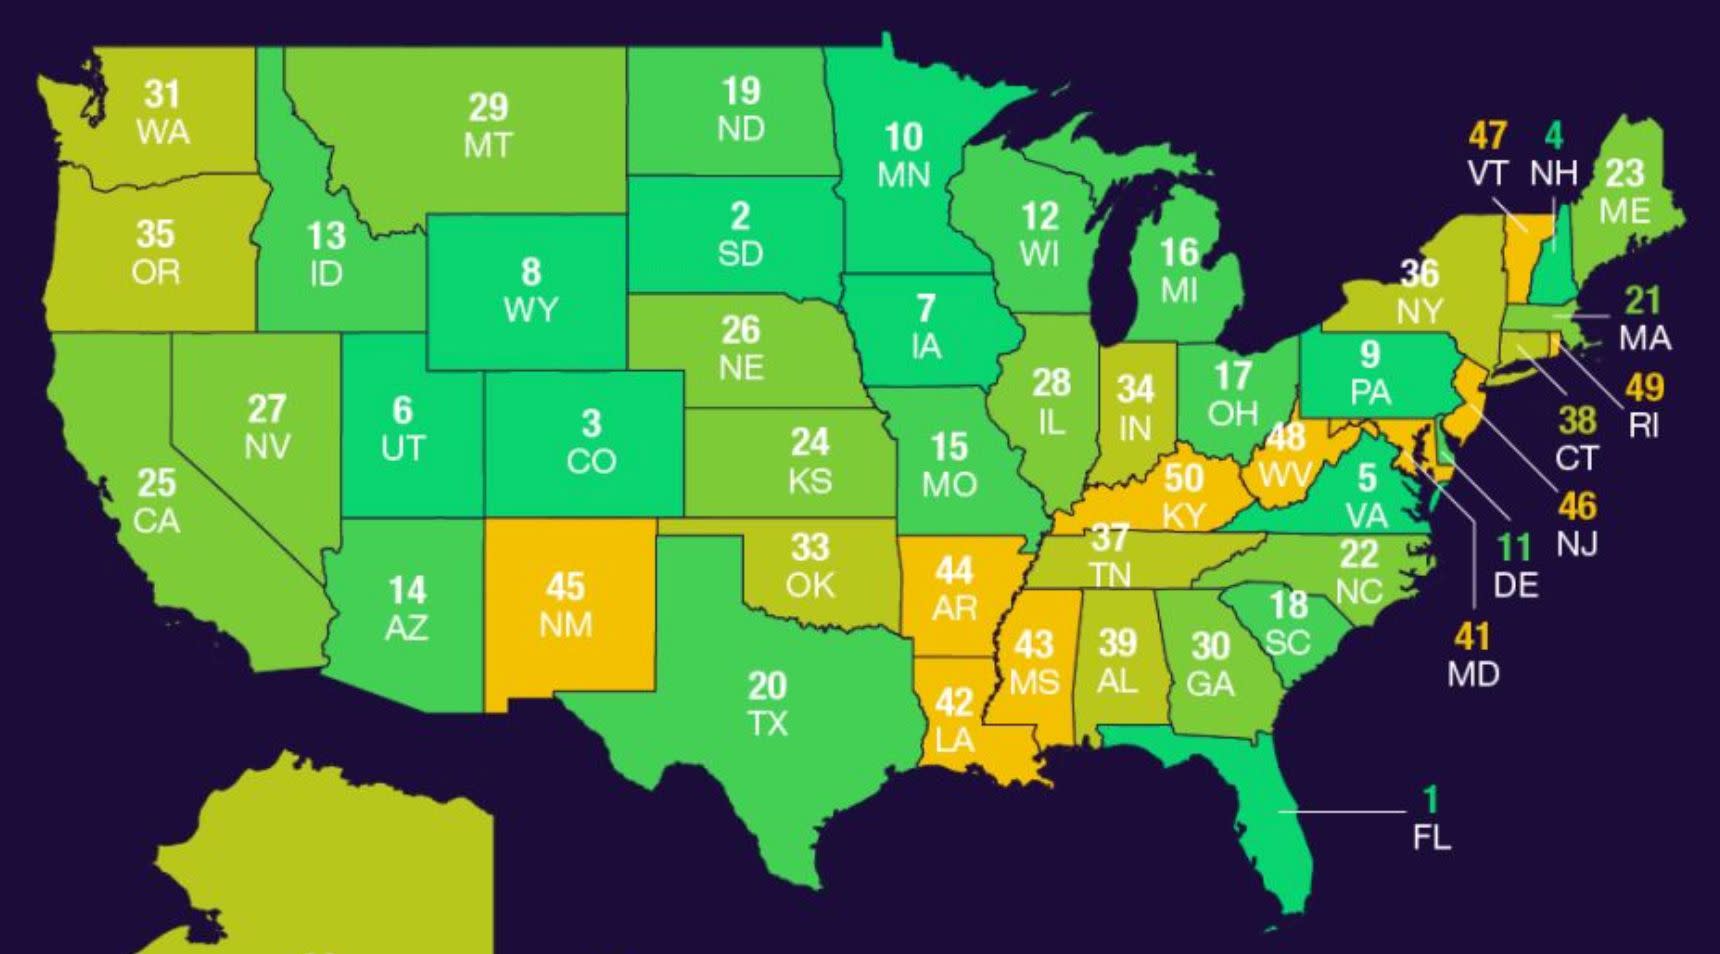 The best and worst U.S. states for retirement